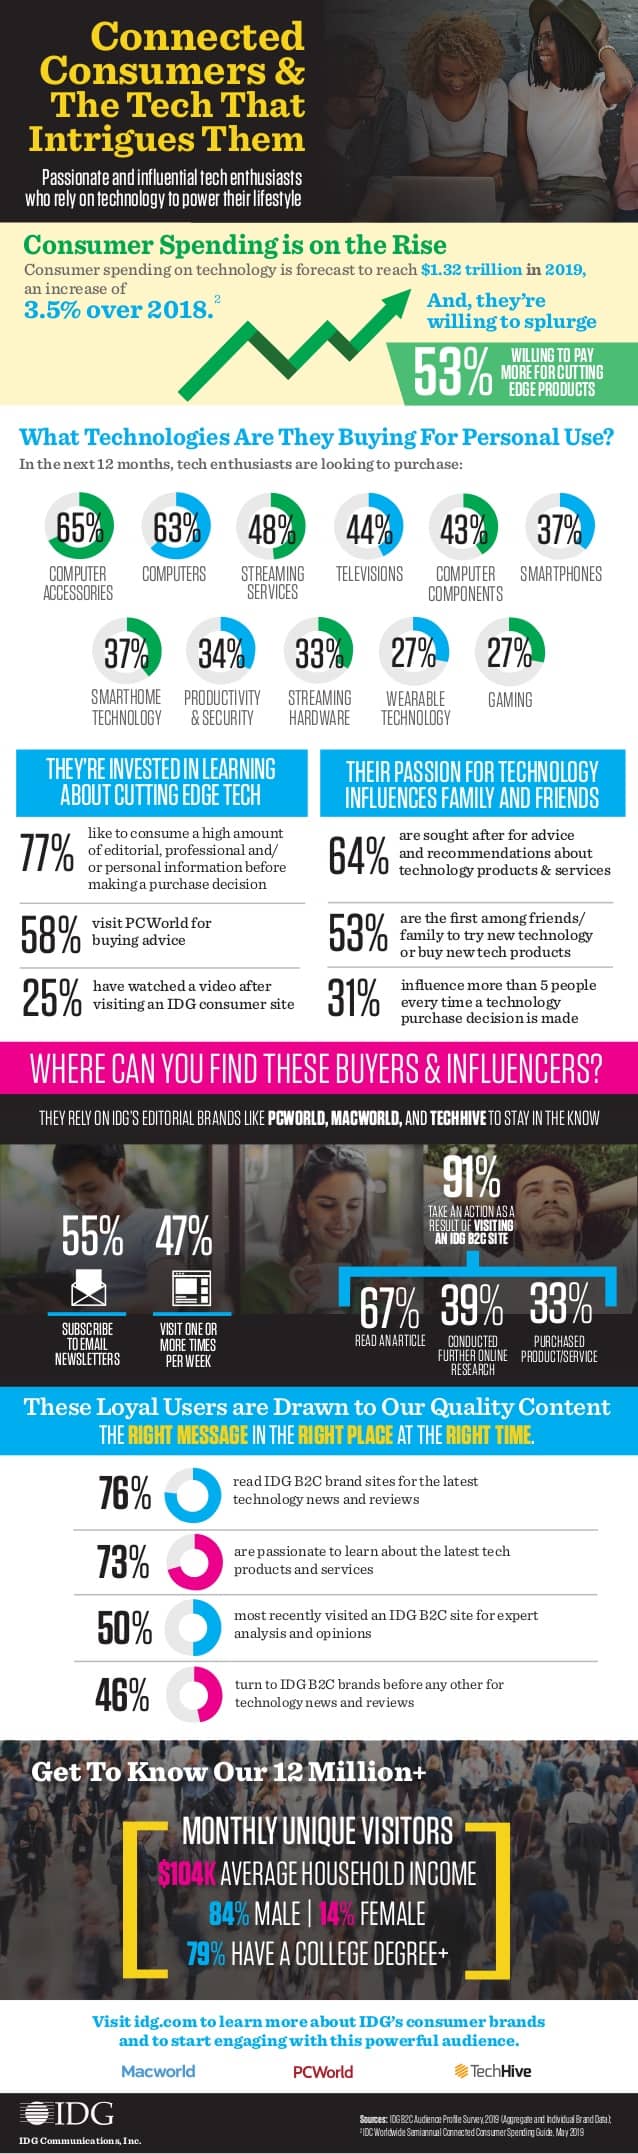 connected consumers and the technology they use